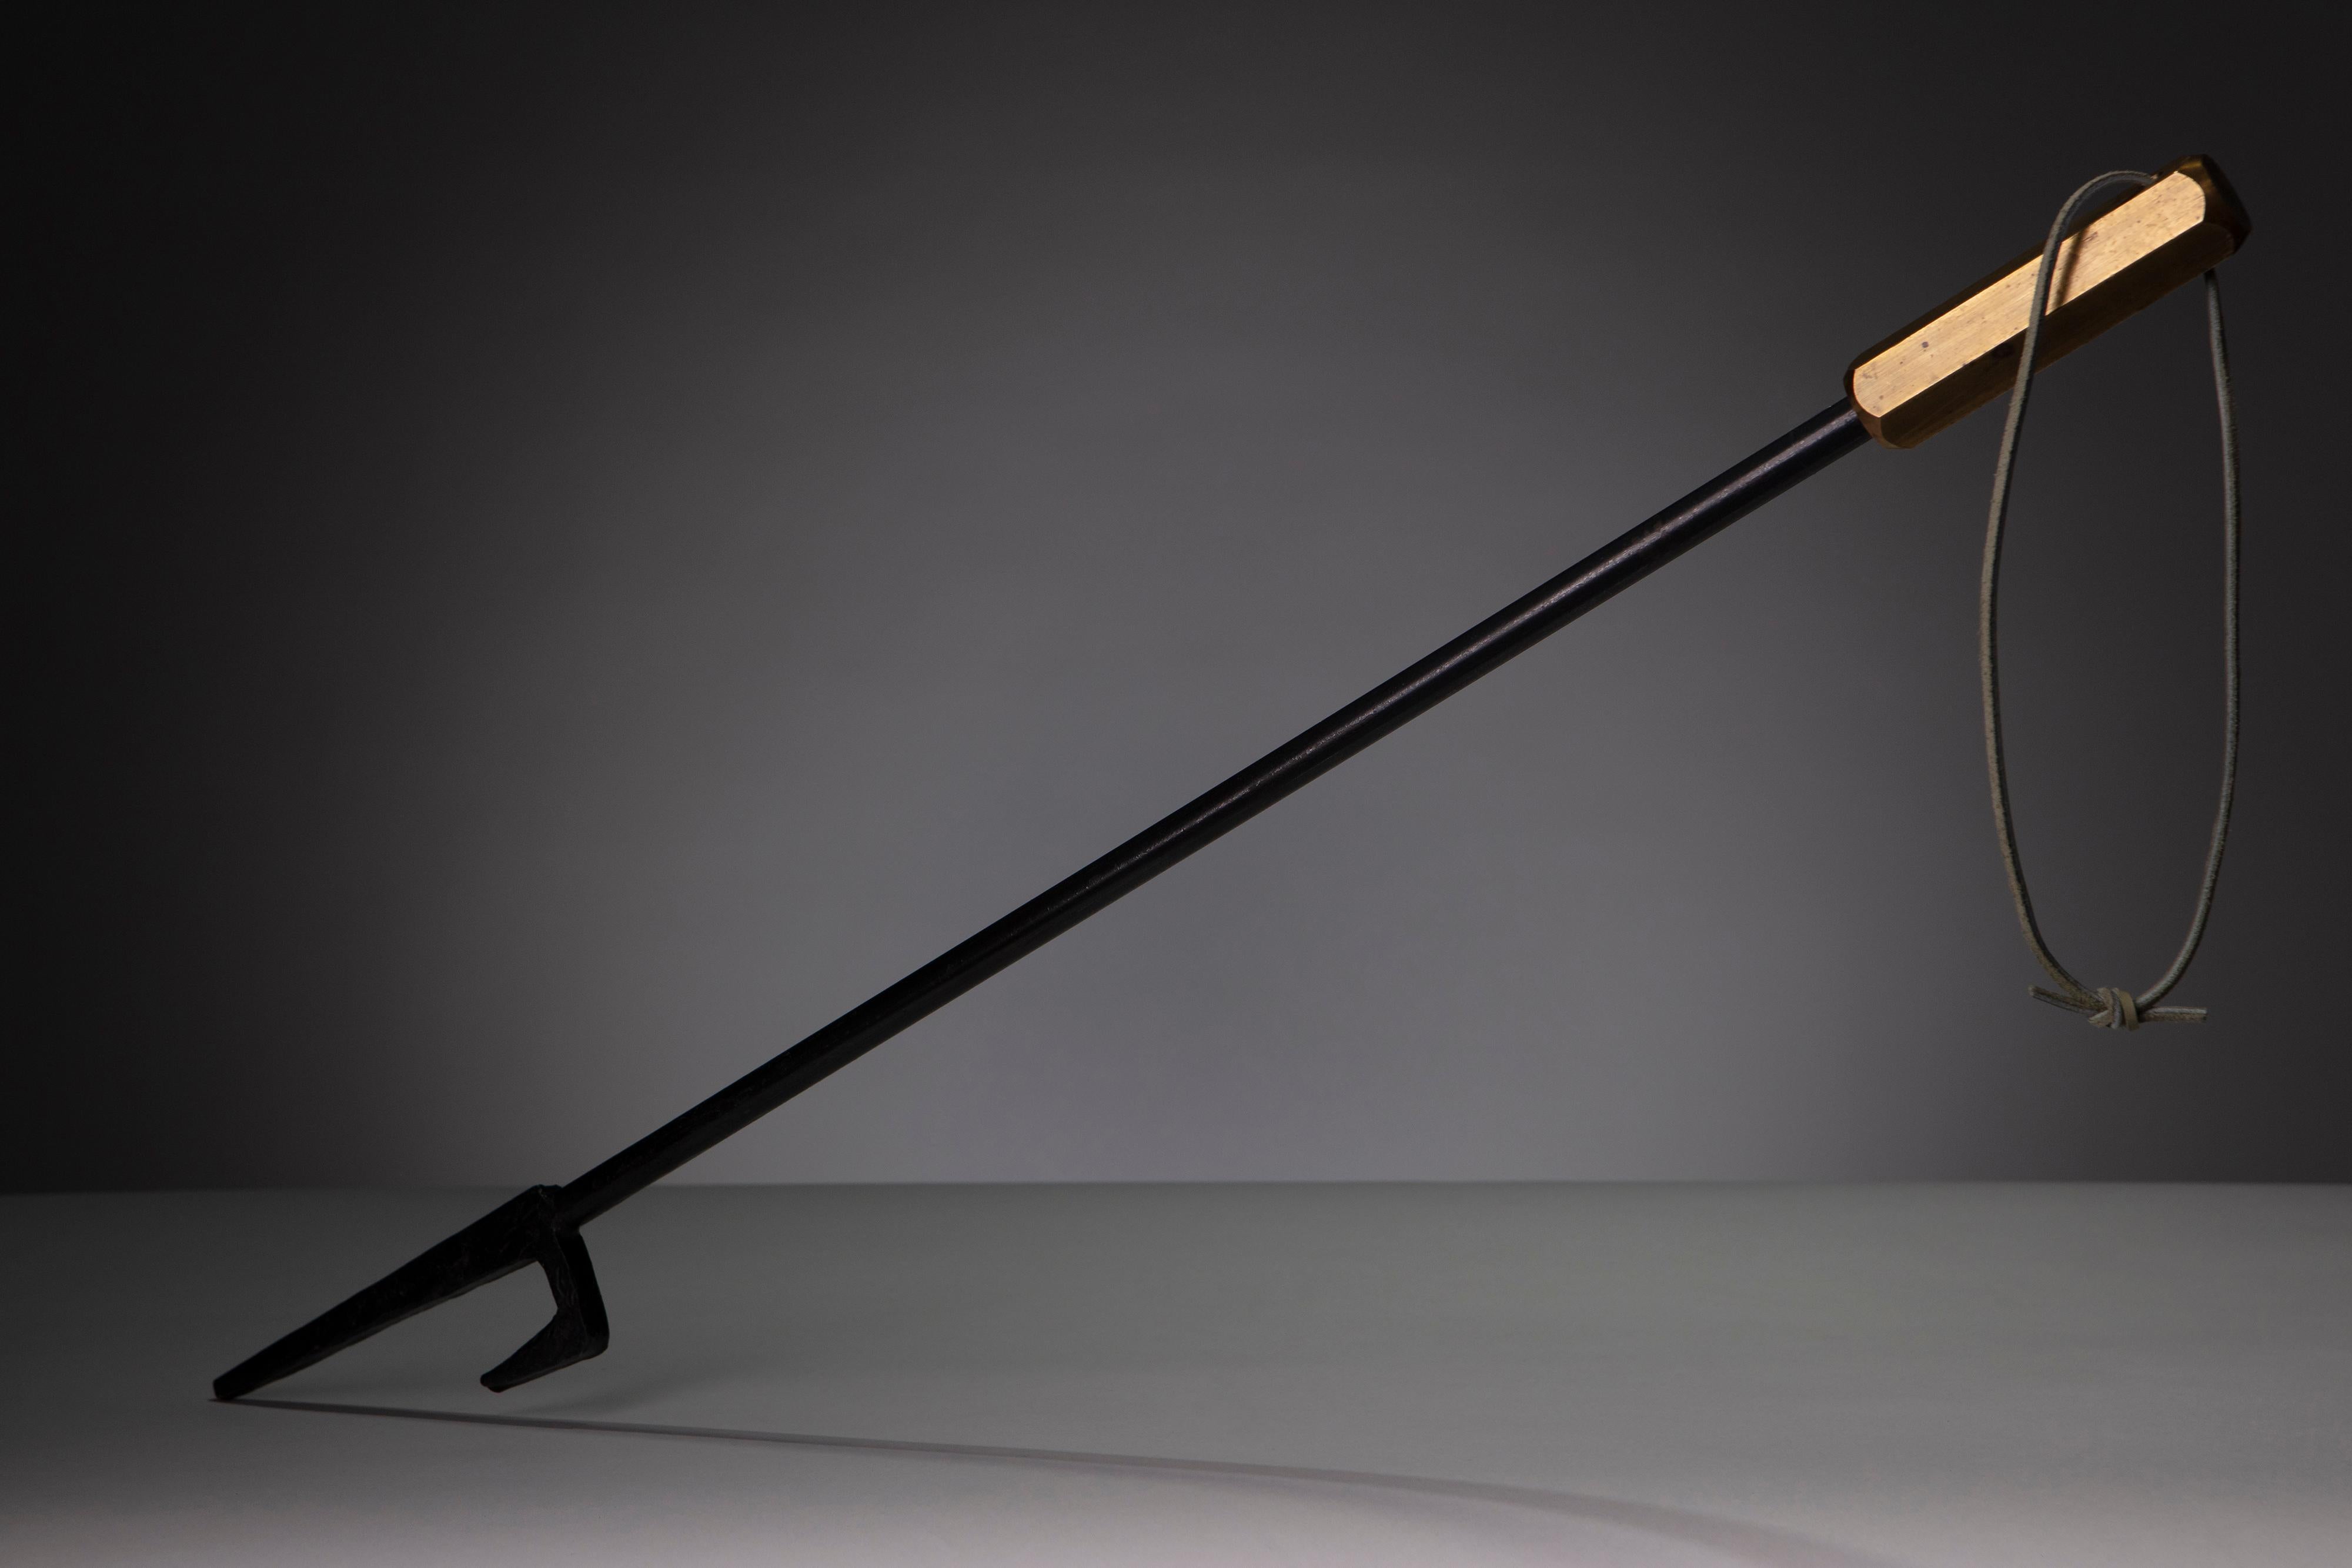 A unique contemporary steel fireplace tool with a brass forged handle. This is a one-of-a-kind piece and would make a great addition to any modern home.

Dimensions:
19 1/2